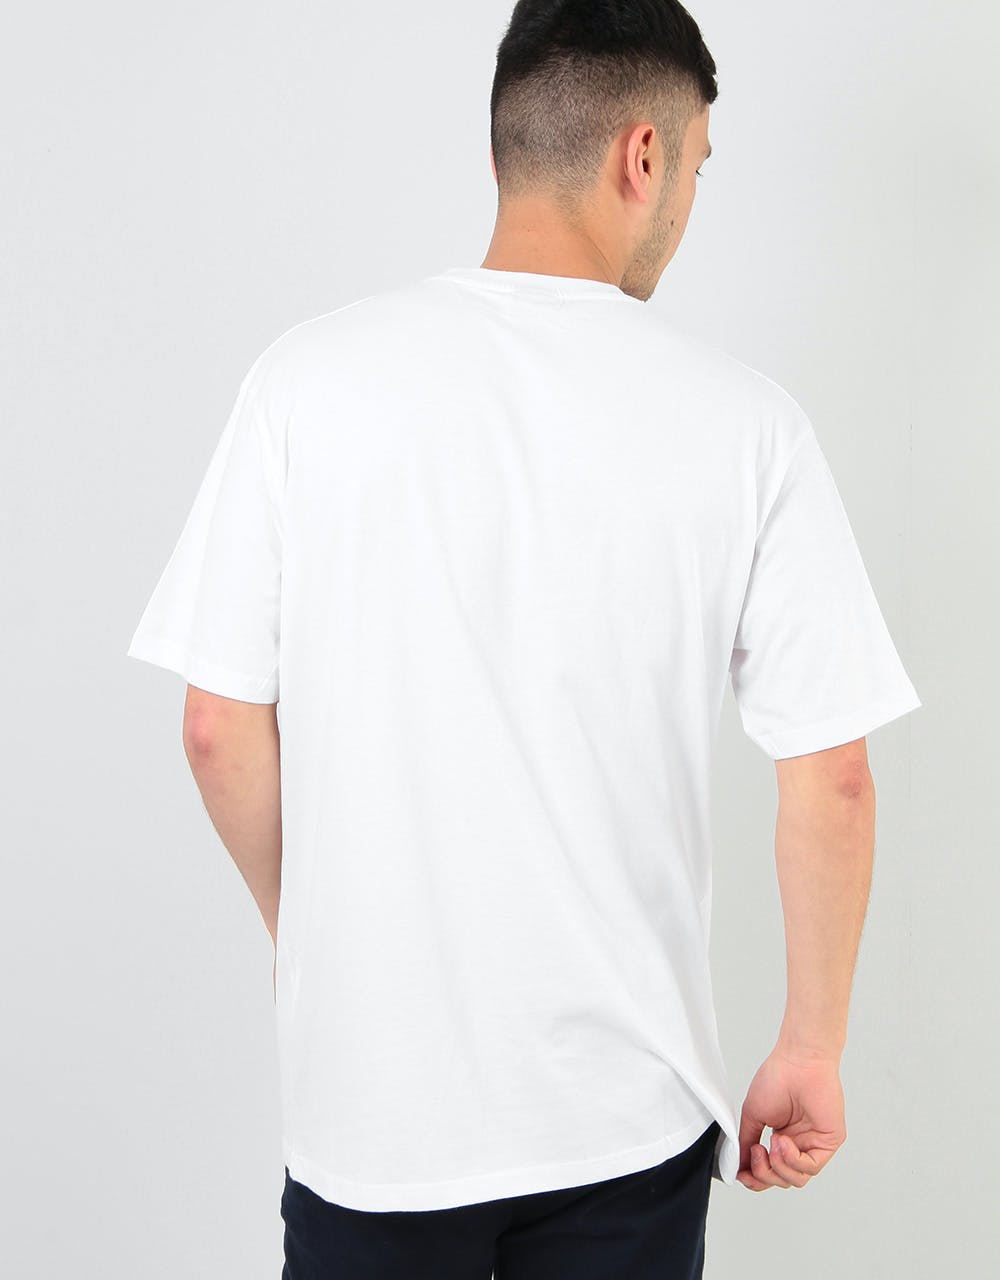 Independent Truck Co. T-Shirt - White